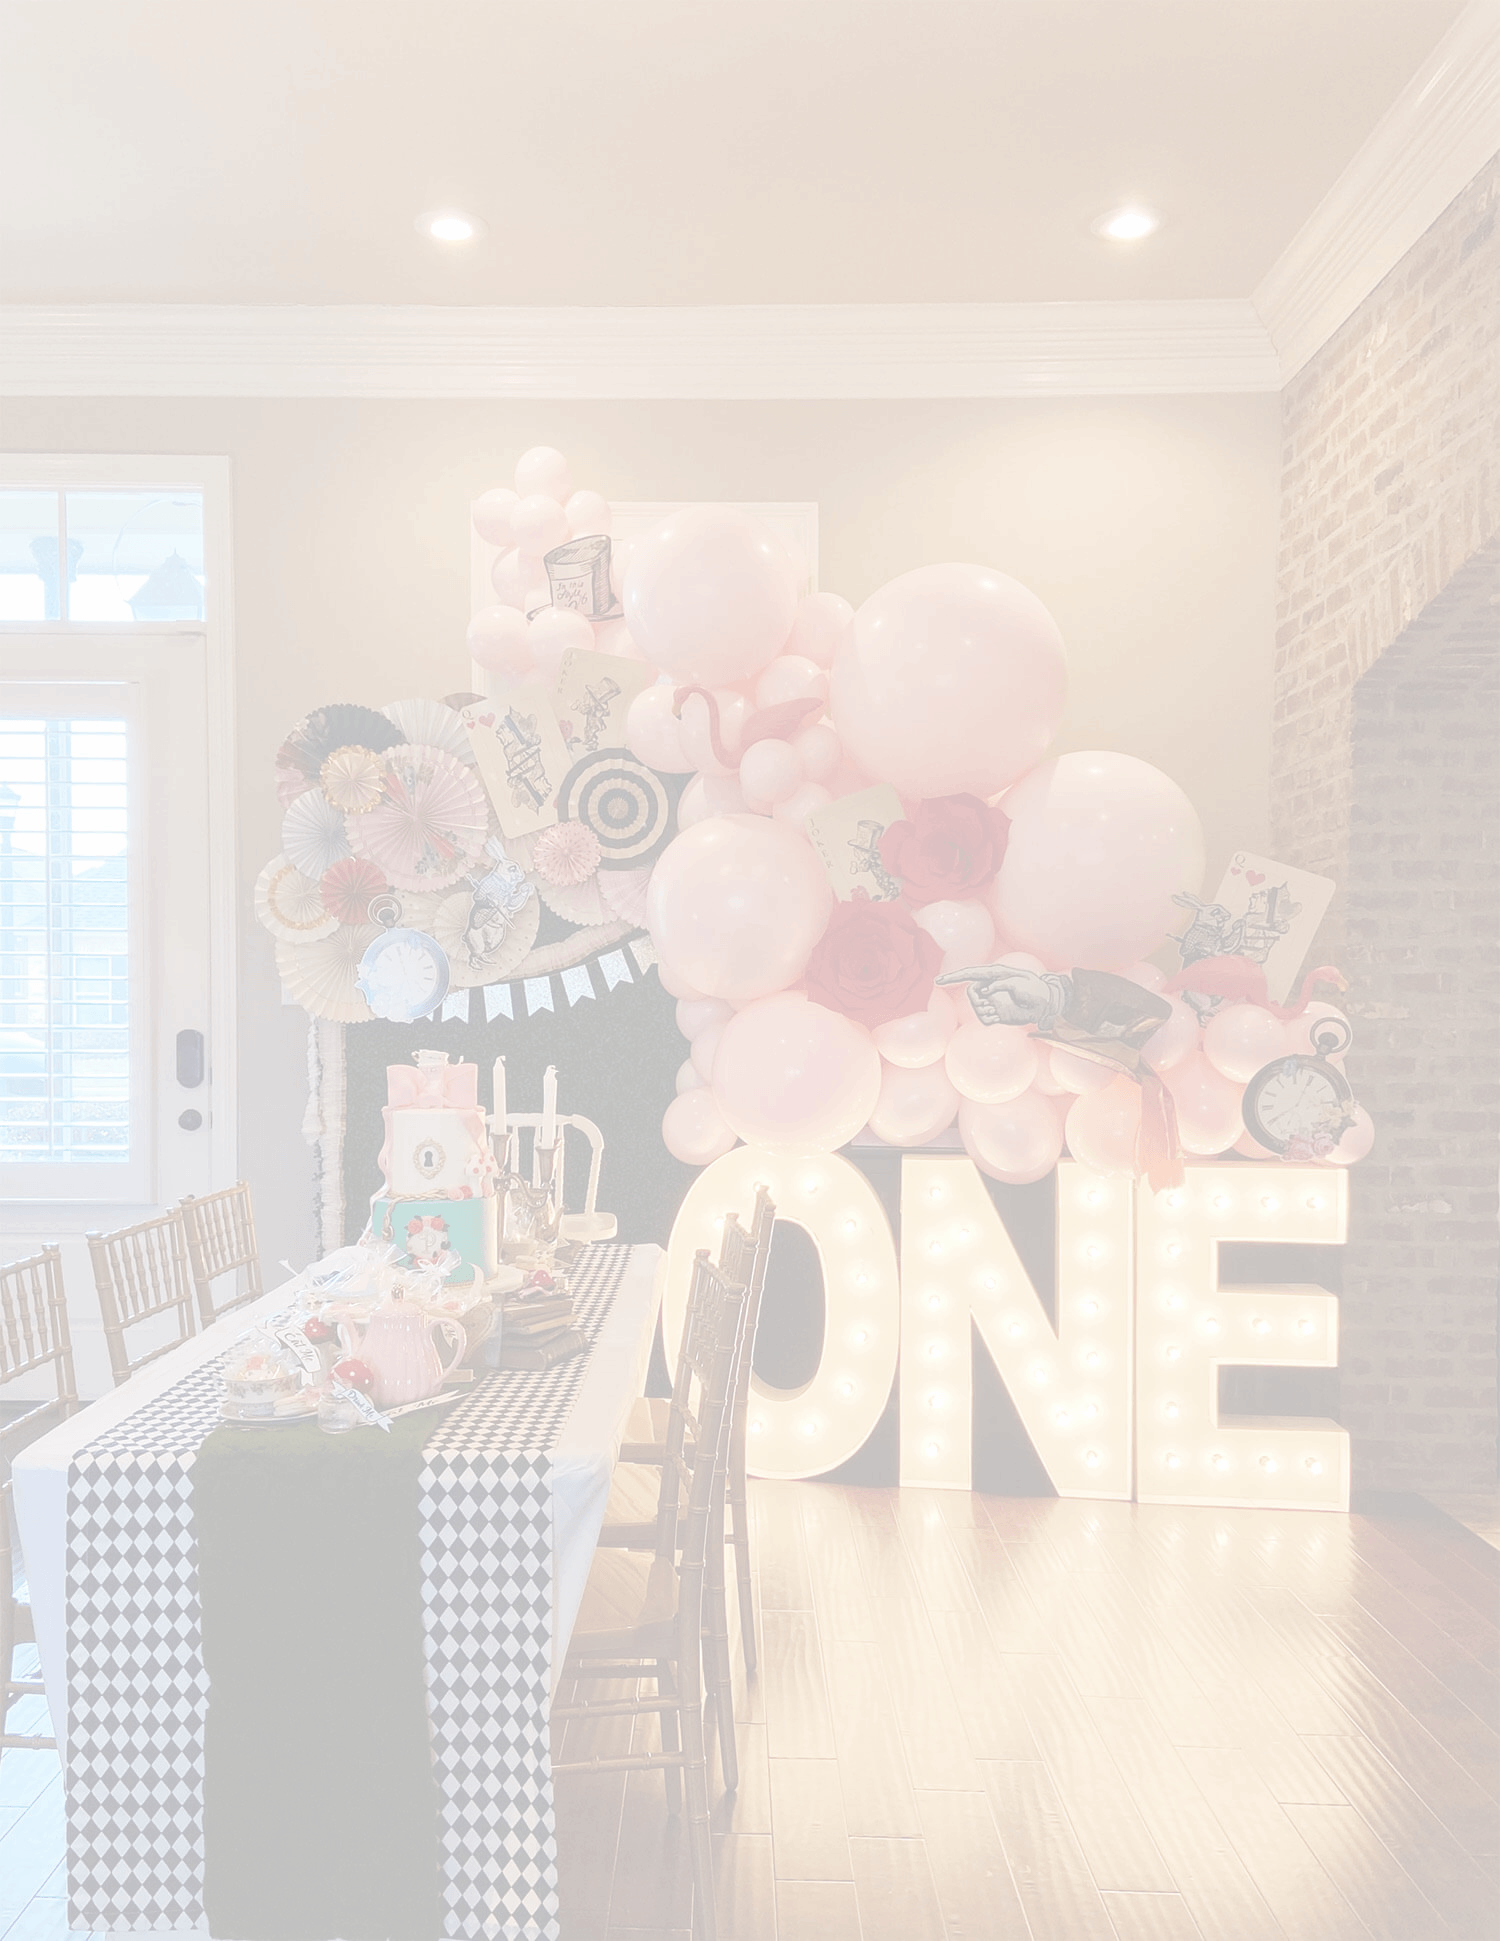 Just Peachy styling including balloons, marquee letters, table decorations, cookies, and cake for an Alice In Wonderland themed birthday party.